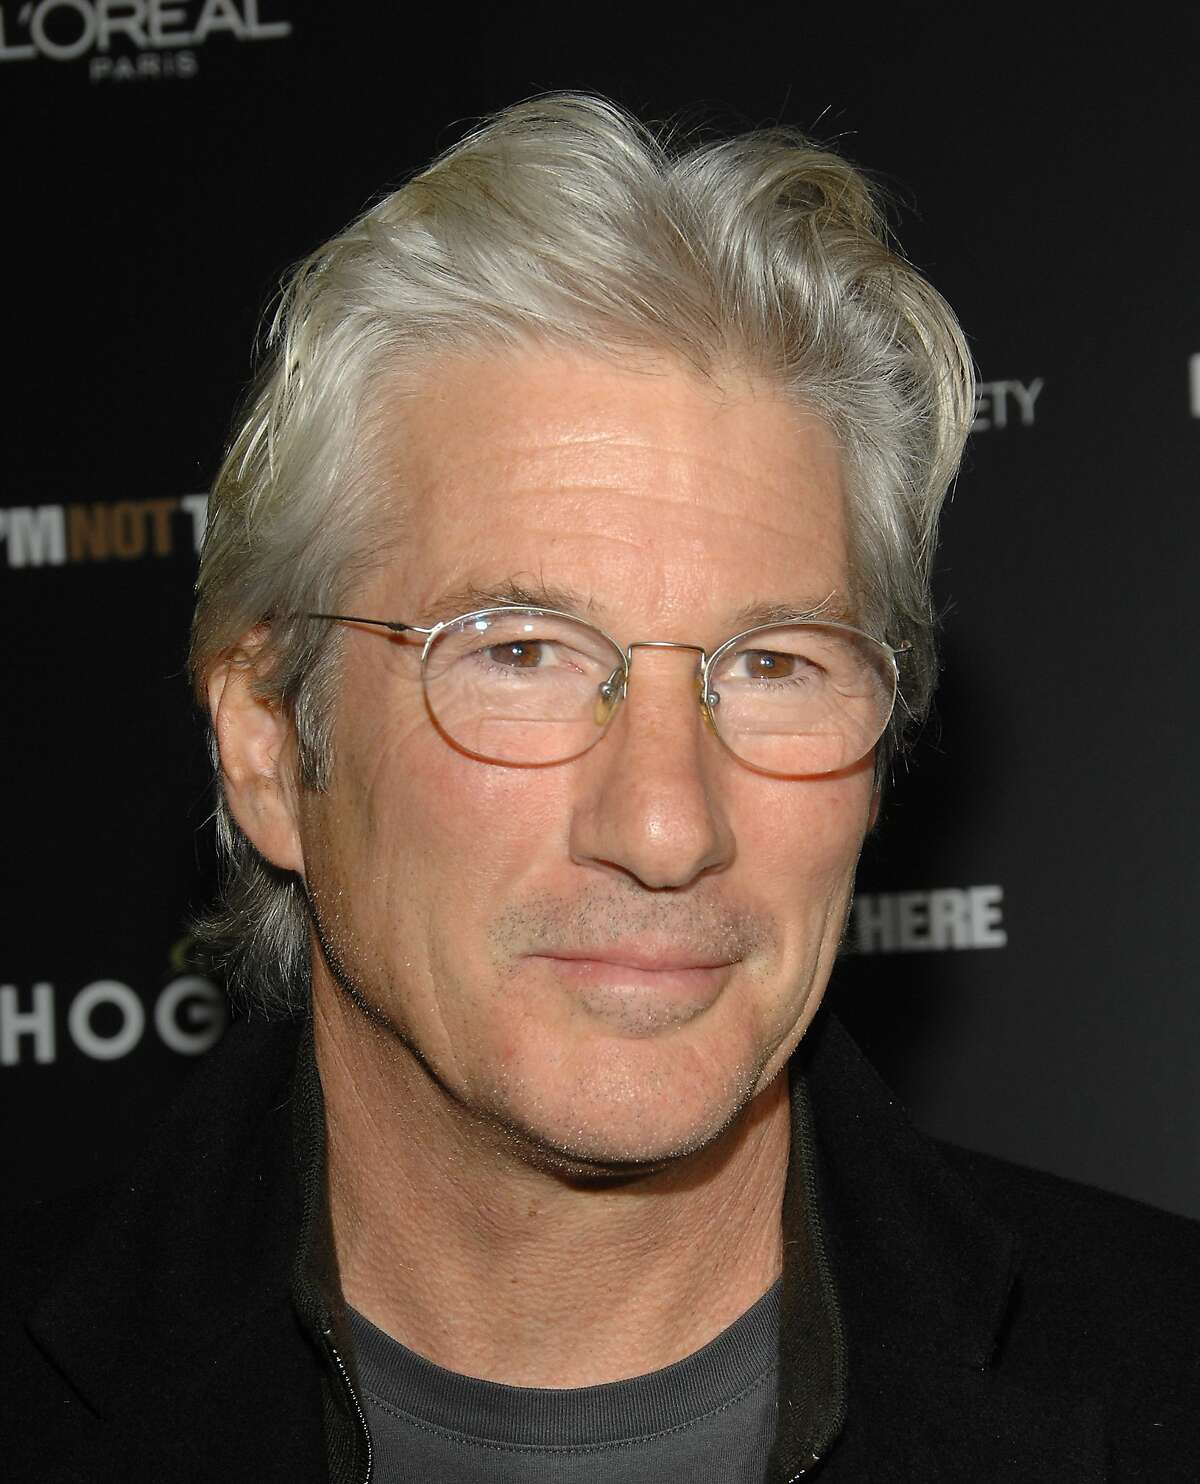 ** FILE ** Actor Richard Gere attends a special Cinema Society hosted screening of "I'm Not There" at the Chelsea West Cinemas, in this Nov. 13, 2007, file photo in New York. Gere, like Martha Stewart before him, is running into some zoning hurdles as he tries to put his imprint on the wealthy New York suburb of Bedford. Gere, the "Pretty Woman" and "Chicago" actor, and a partner have opened a cafe and bakery and have plans for a luxury inn and fine restaurant. But their new 180-foot-long cedar fence may not pass muster, Building Inspector Richard Megna said Monday, April 14, 2008. (AP Photo/Evan Agostini, file)